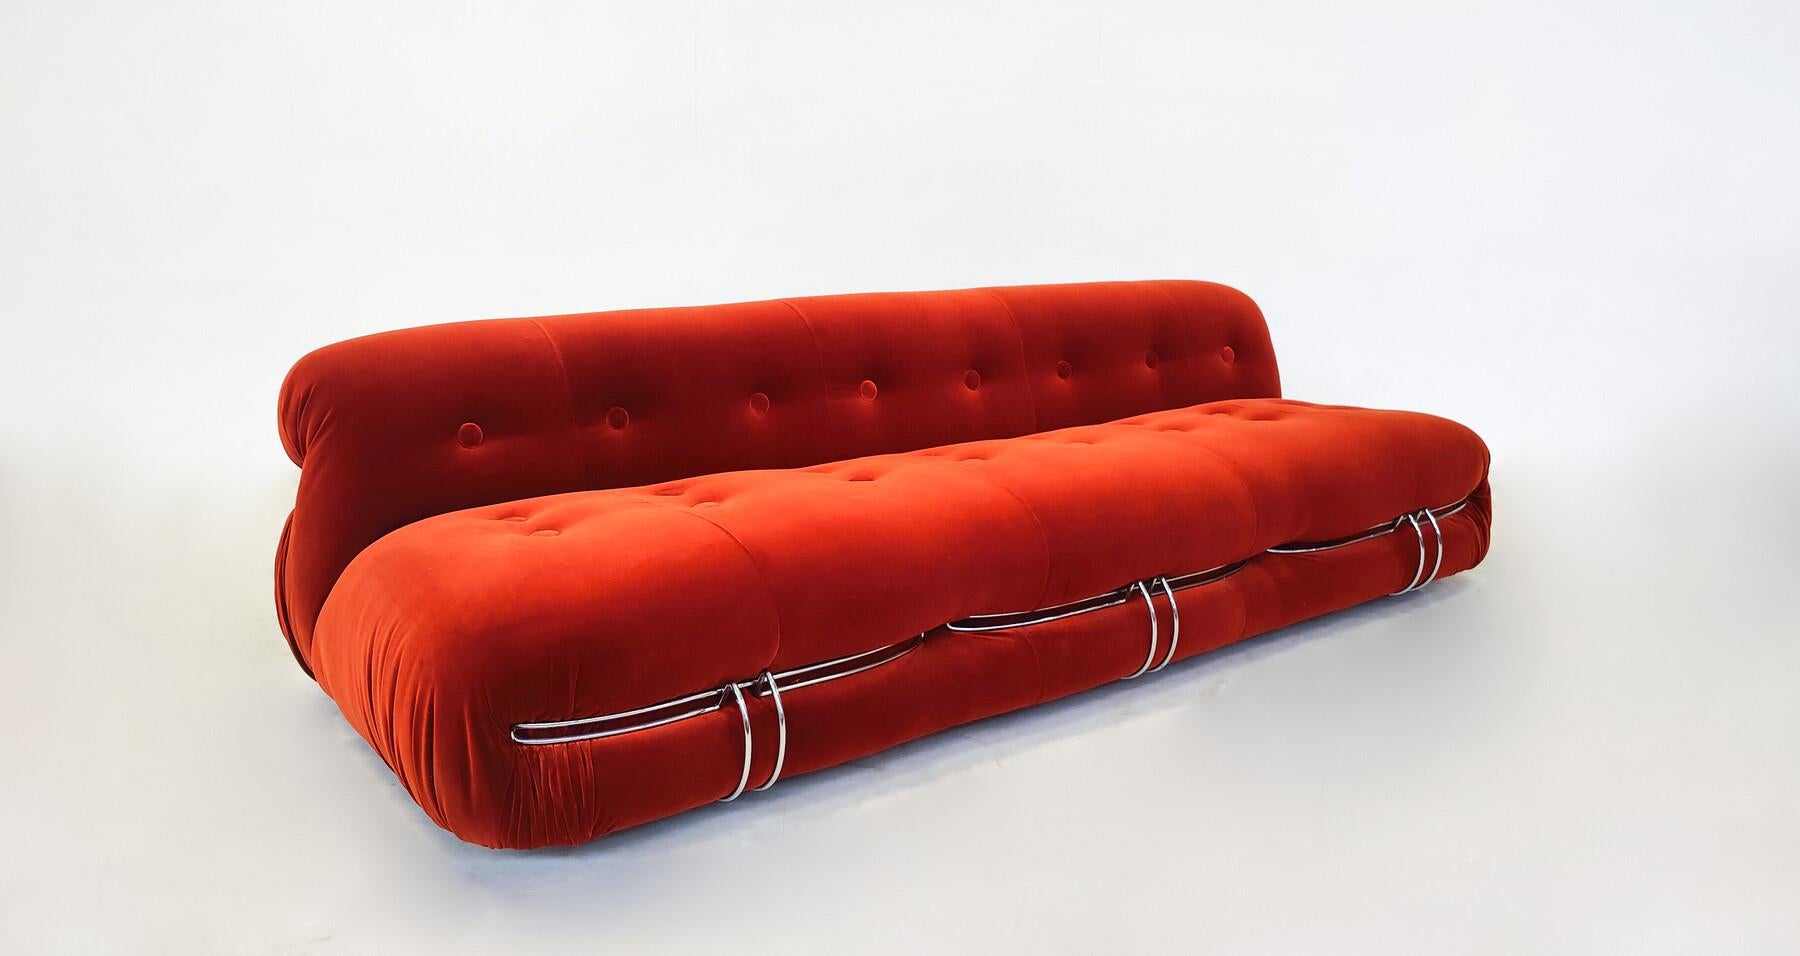 Midcentury Orange Soriana Three-seater by Tobia & Afra Scarpa for Cassina, 1970s - New Upholstery ( 2 available).